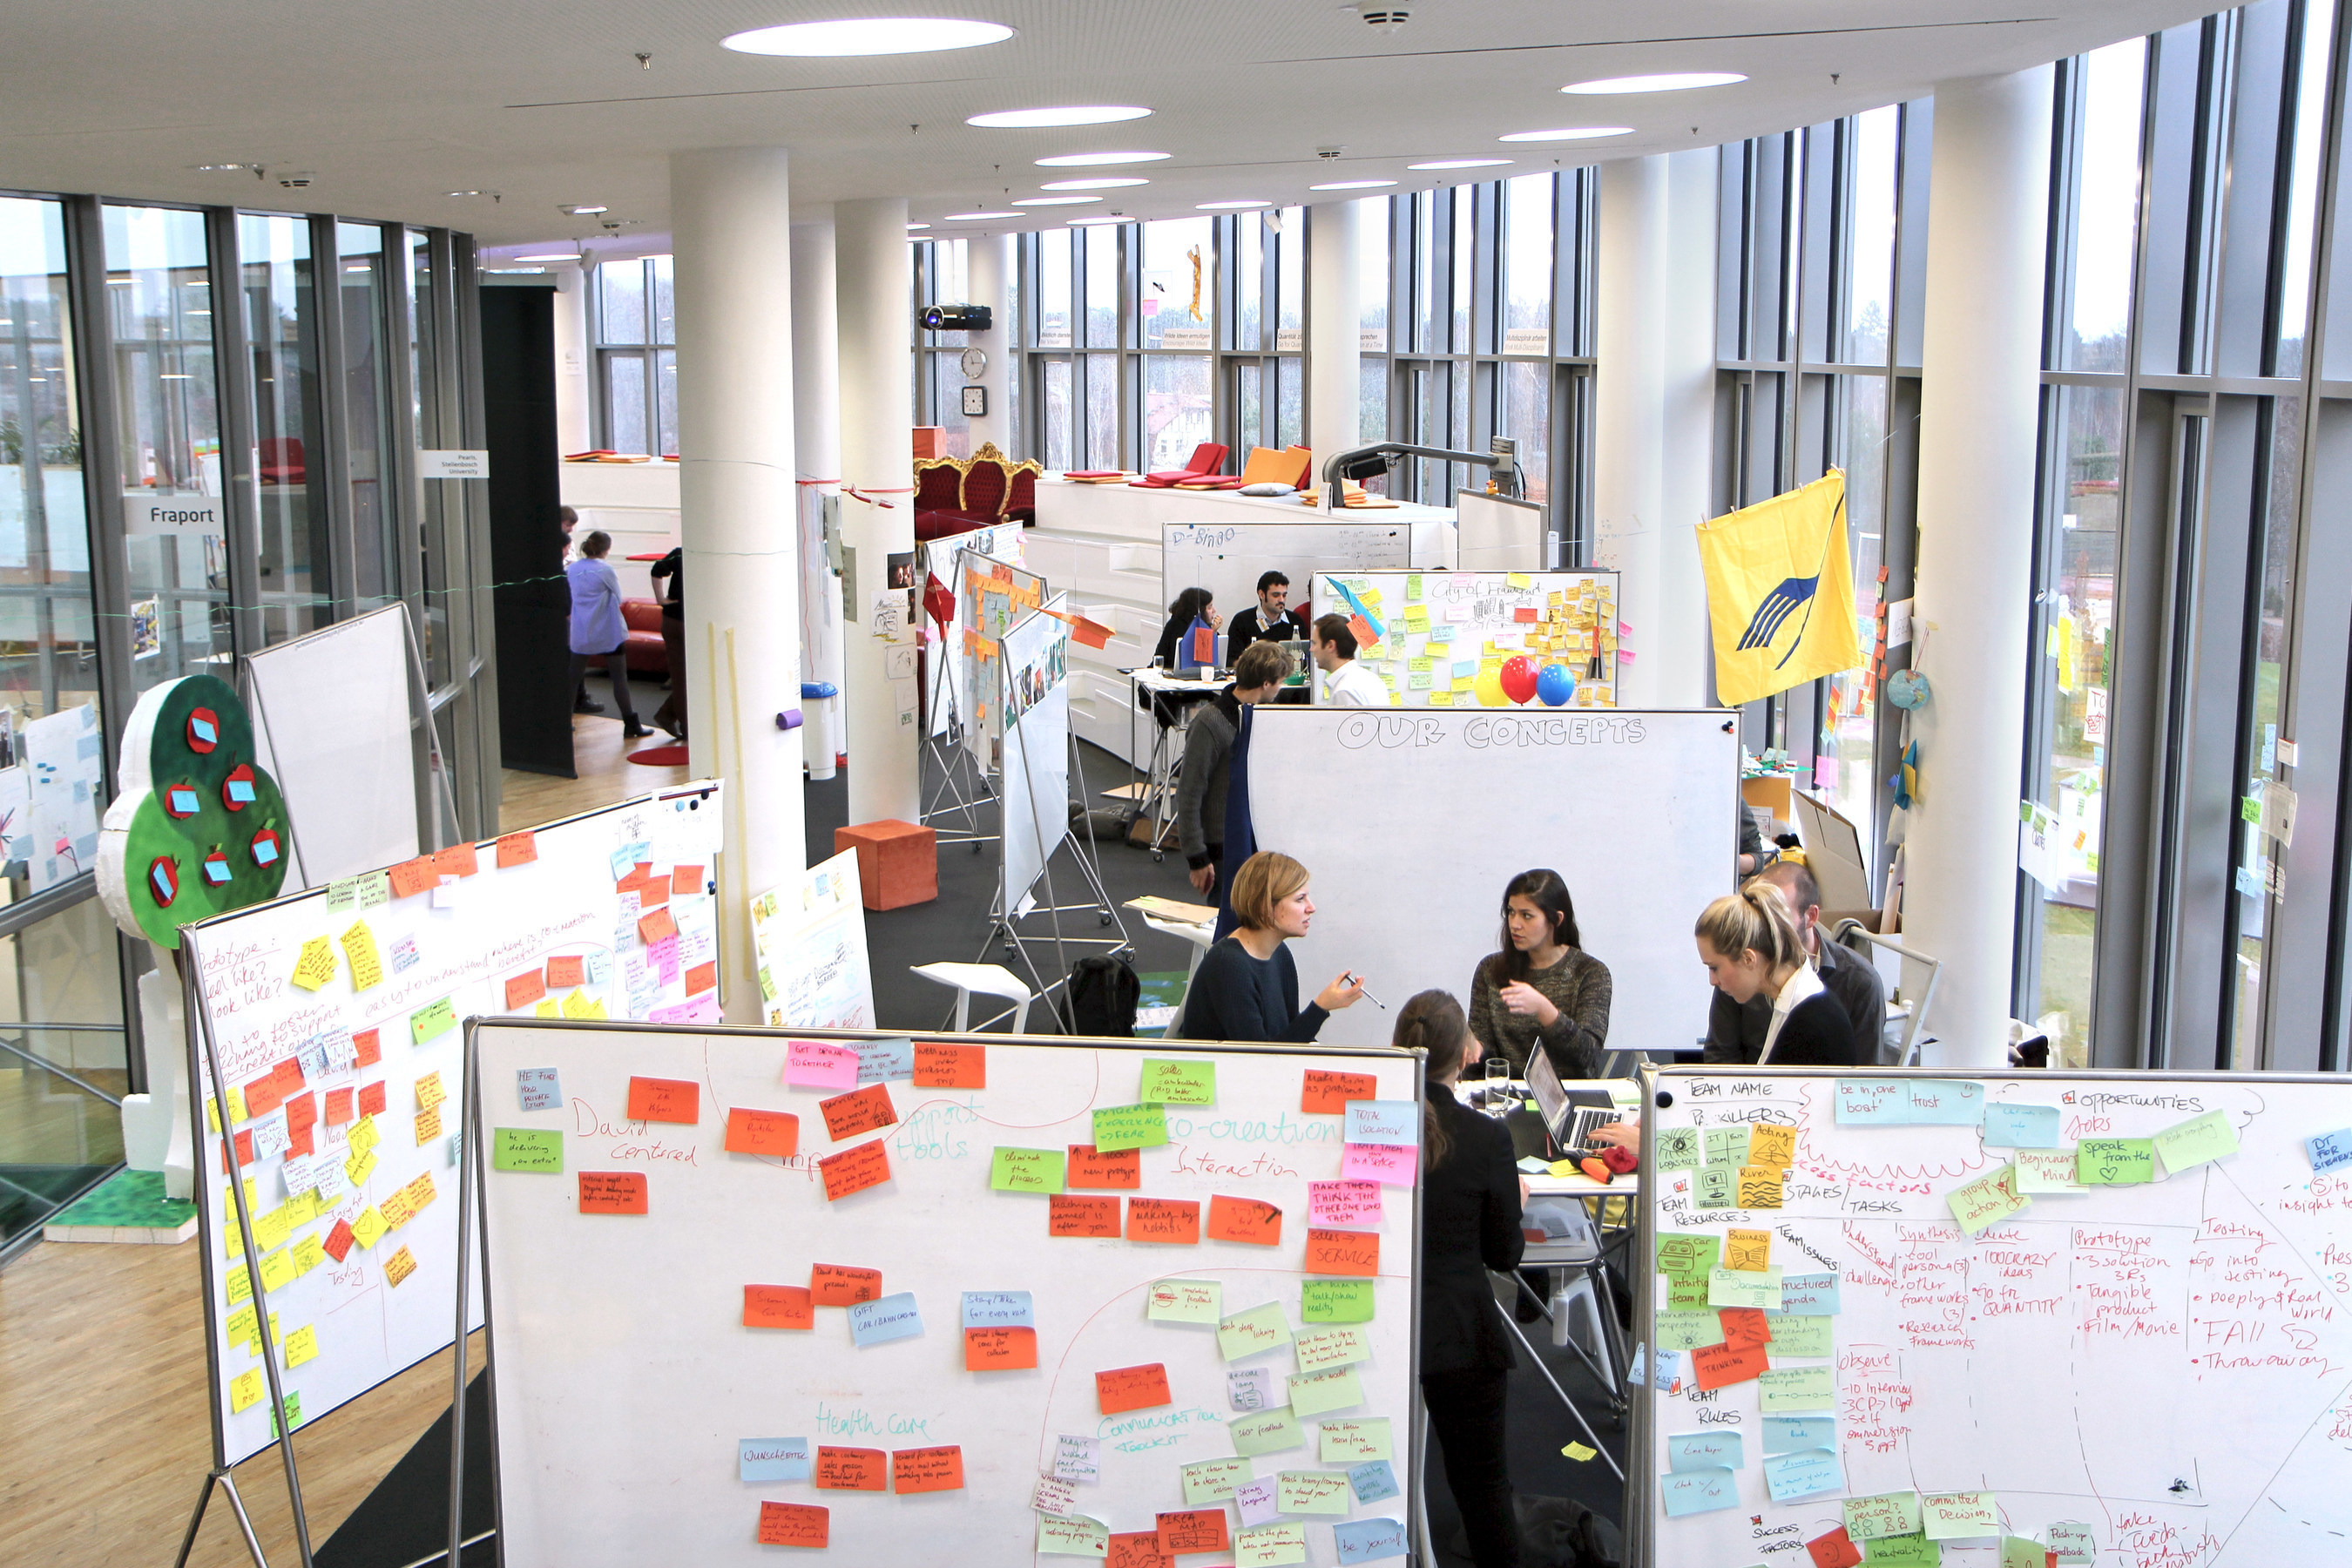 In Palo Alto and Potsdam (Germany), Design Thinking is not only a research subject but also being taught to both students and professionals. The scene above depicts a typical workspace at the HPI School of Design Thinking in Potsdam. Use free of charge with reference "Hasso Plattner Institute". Design Thinking, Innovation, Hasso Plattner, Research, Creativity, Teamwork, Collaboration, Business, Professionals, Companies, Enterprise (PRNewsFoto/HPI Hasso Plattner Institute) (PRNewsFoto/HPI Hasso Plattner Institute)